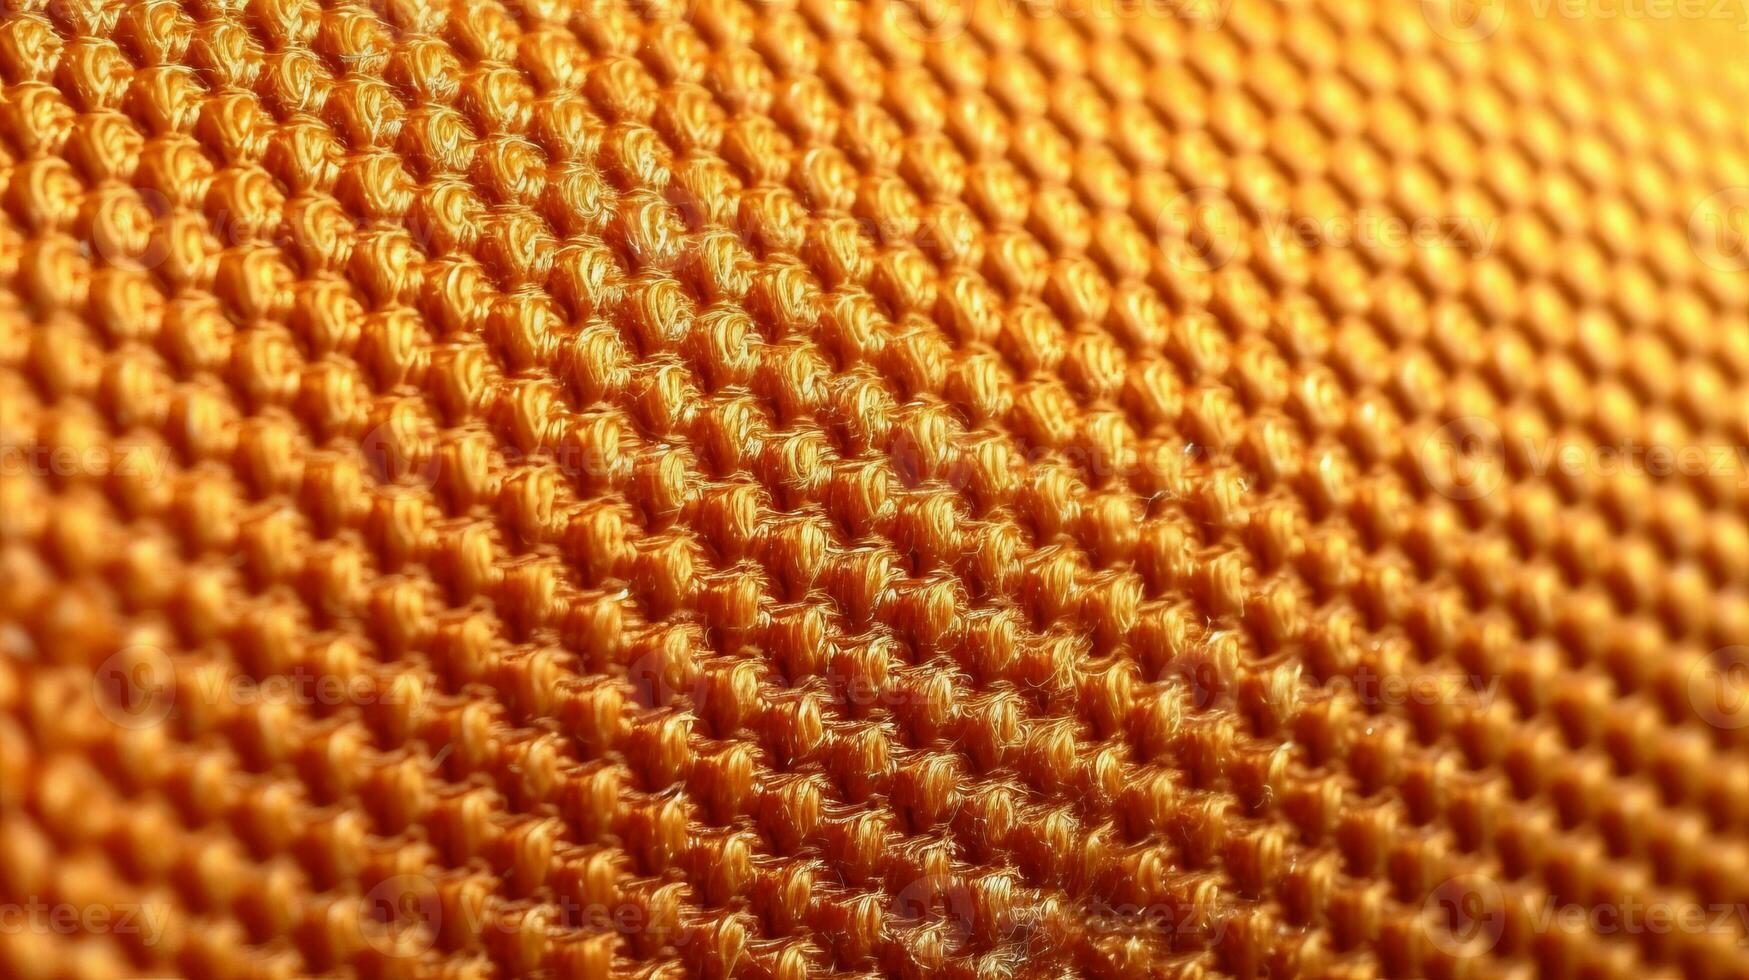 Orange soccer fabric texture with air mesh. Athletic wear backdrop photo